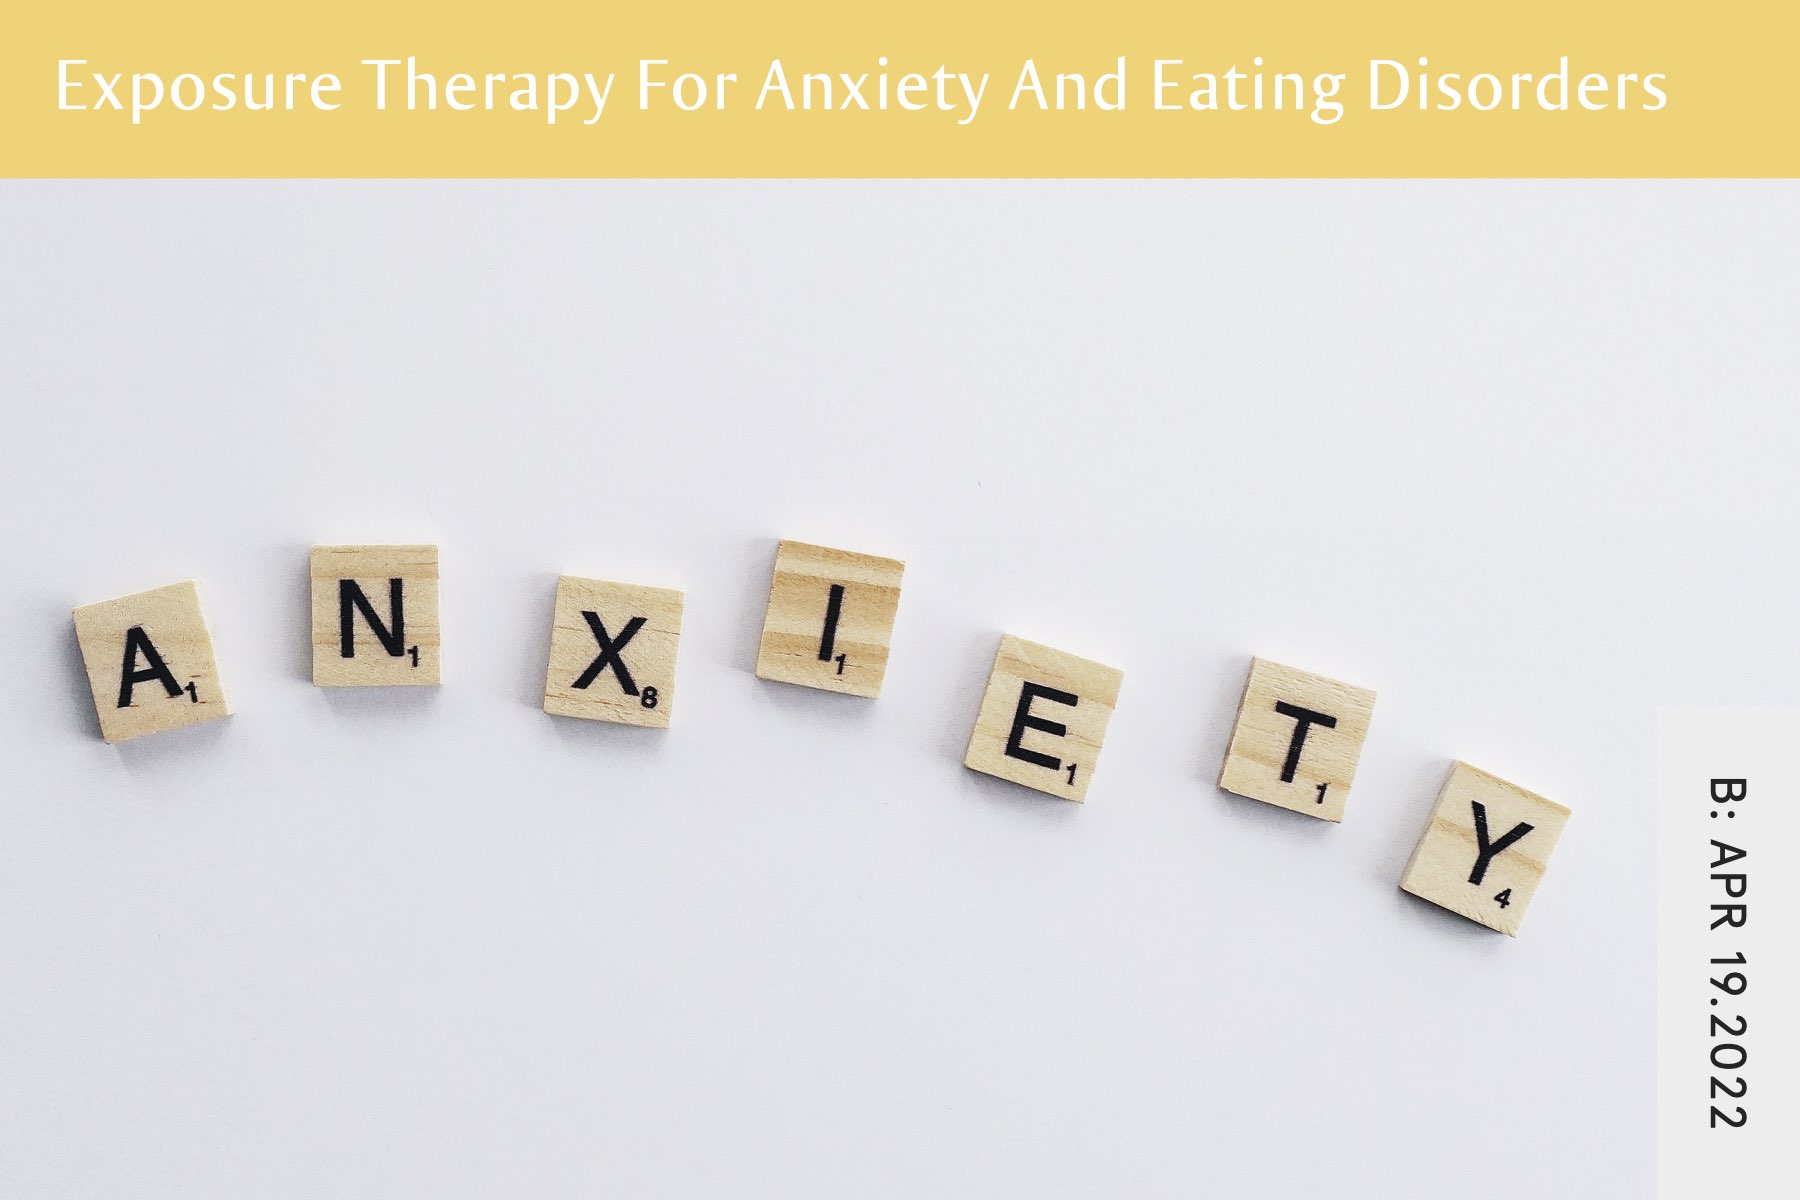 Exposure Therapy For Anxiety And Eating Disorders - Seven Health: Eating Disorder Recovery and Anti Diet Nutritionist